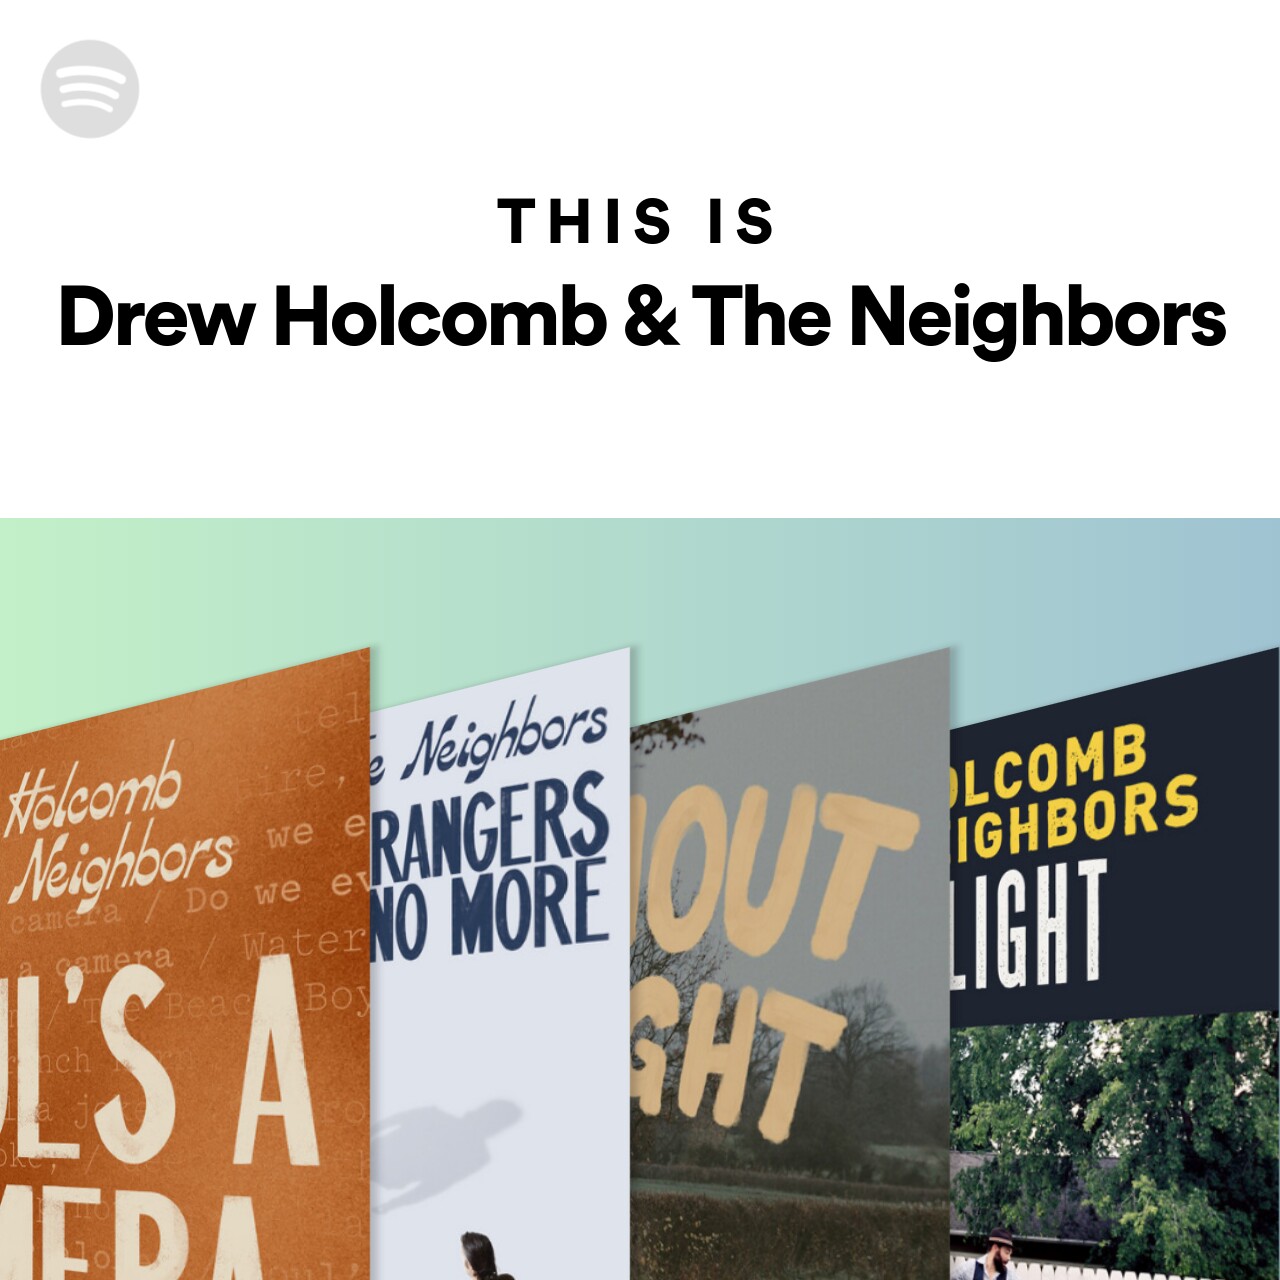 This Is Drew Holcomb & The Neighbors